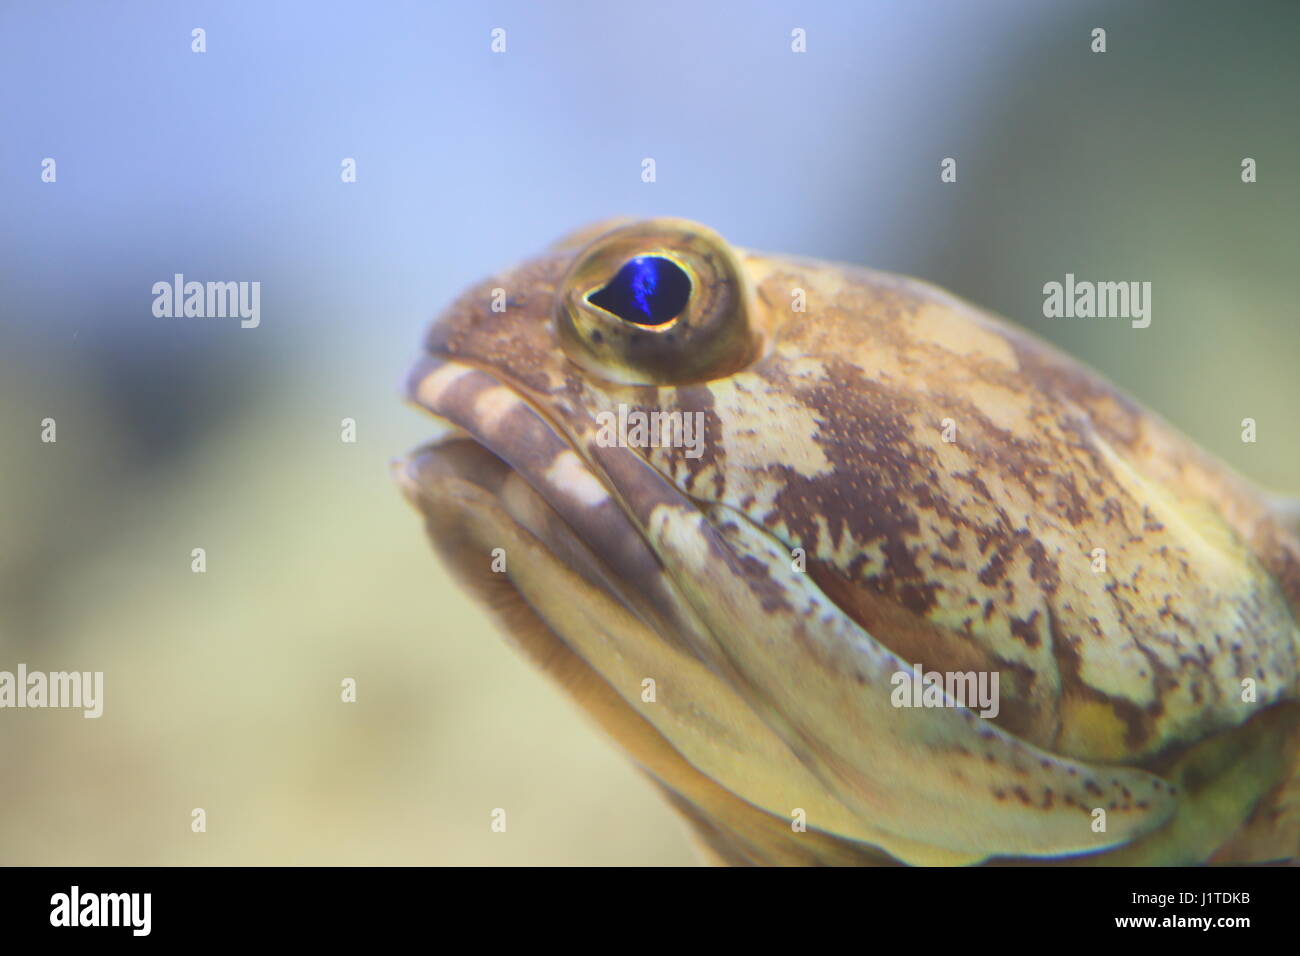 Penny jawfish (Opistognathus sp) in Japan Stock Photo